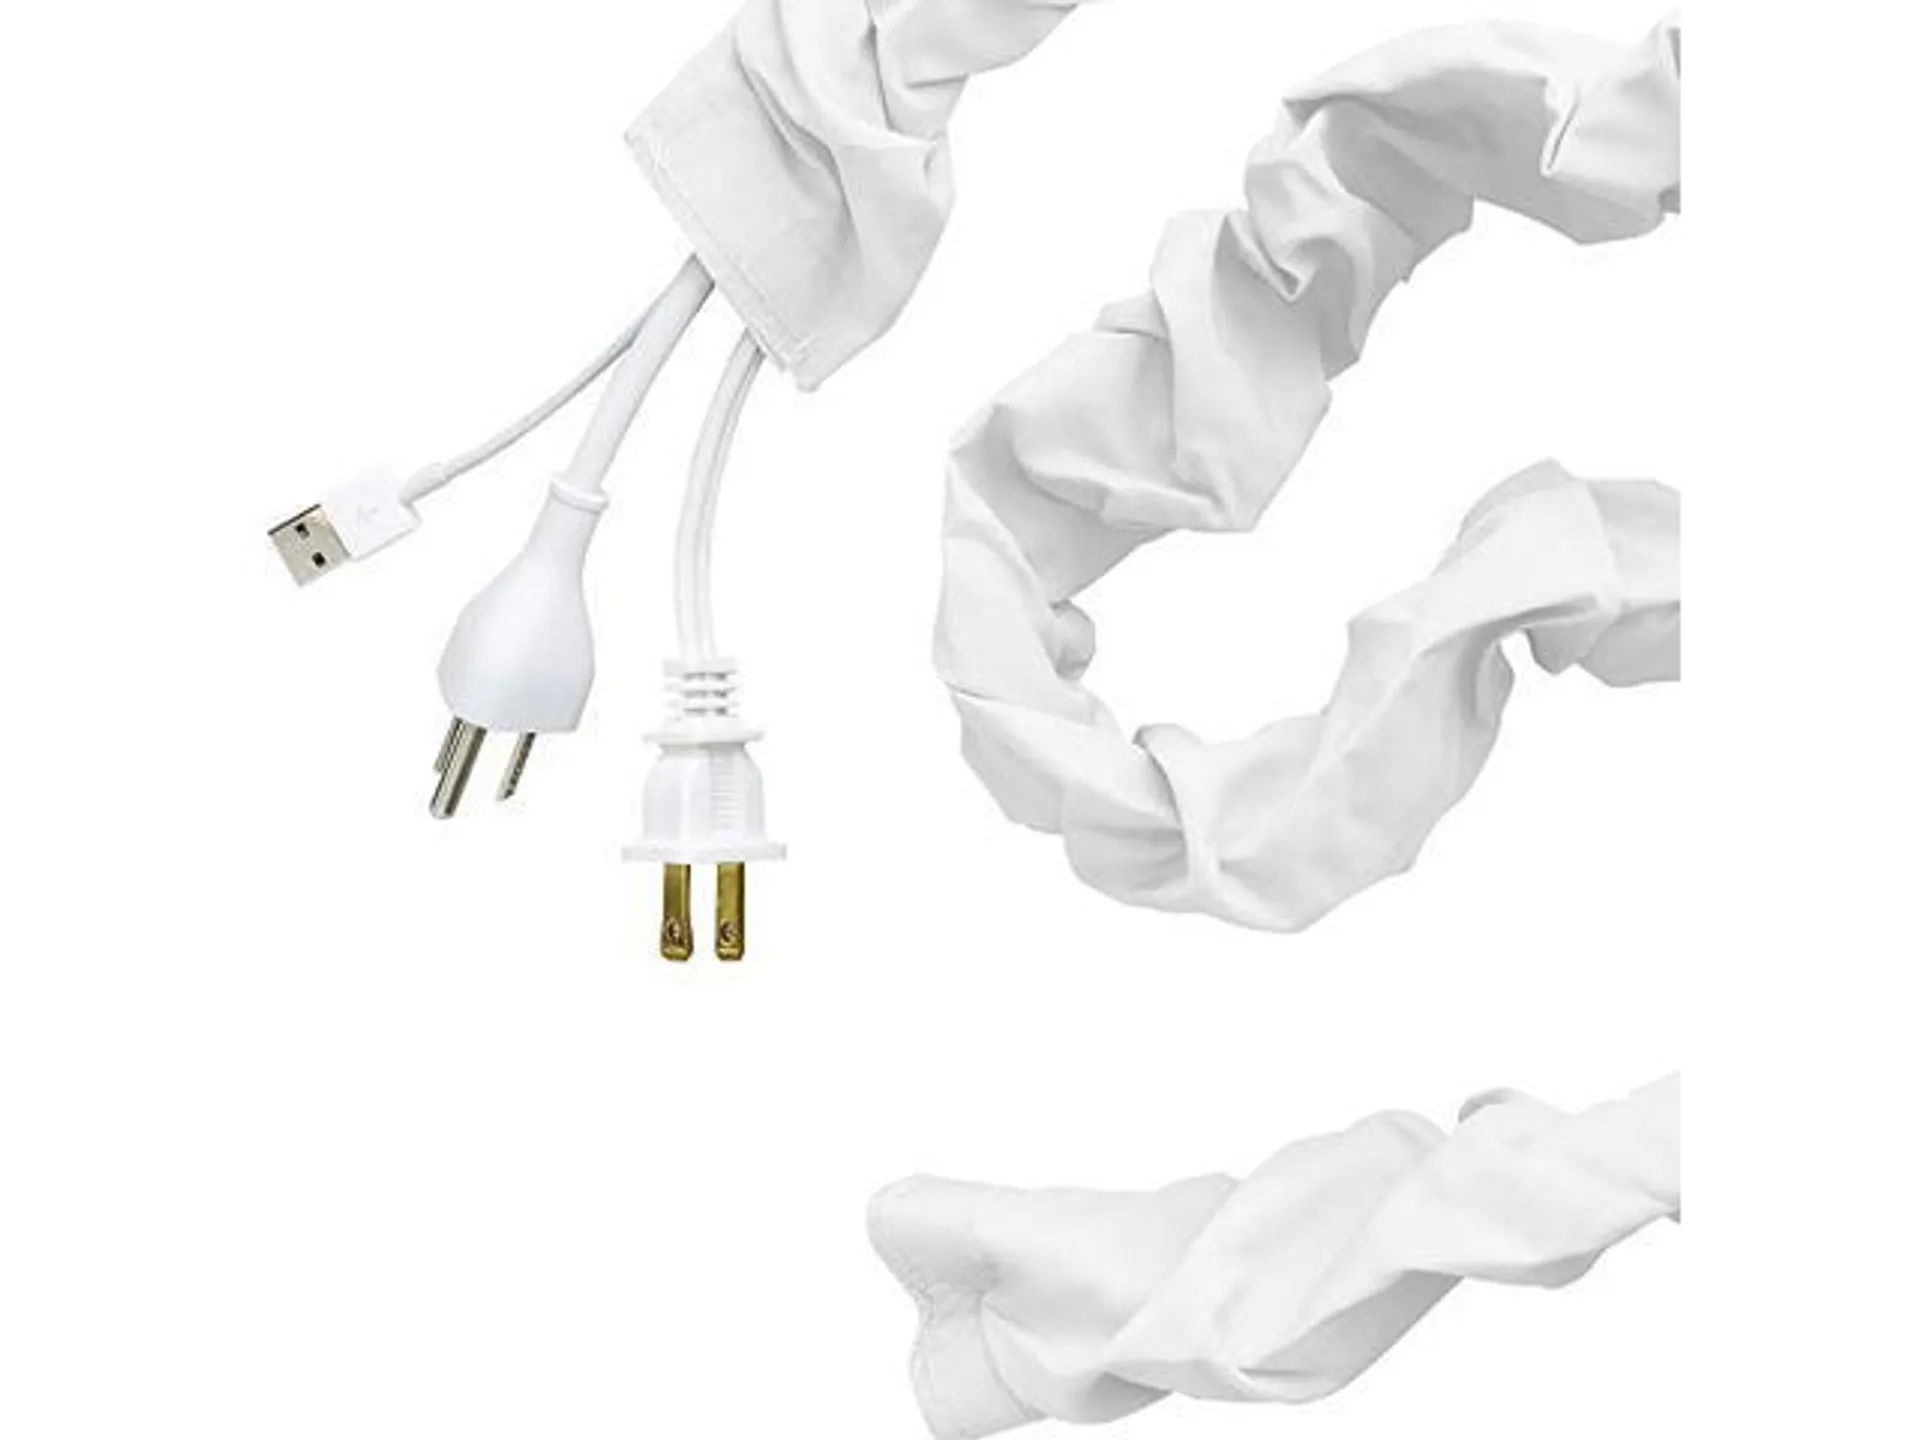 Fabric Cord Cover, 6 Ft, Cable Management and Hider, Easy Installation, Great for Lamps, Light Fixtures, and Desks, Eggshell White, 40723